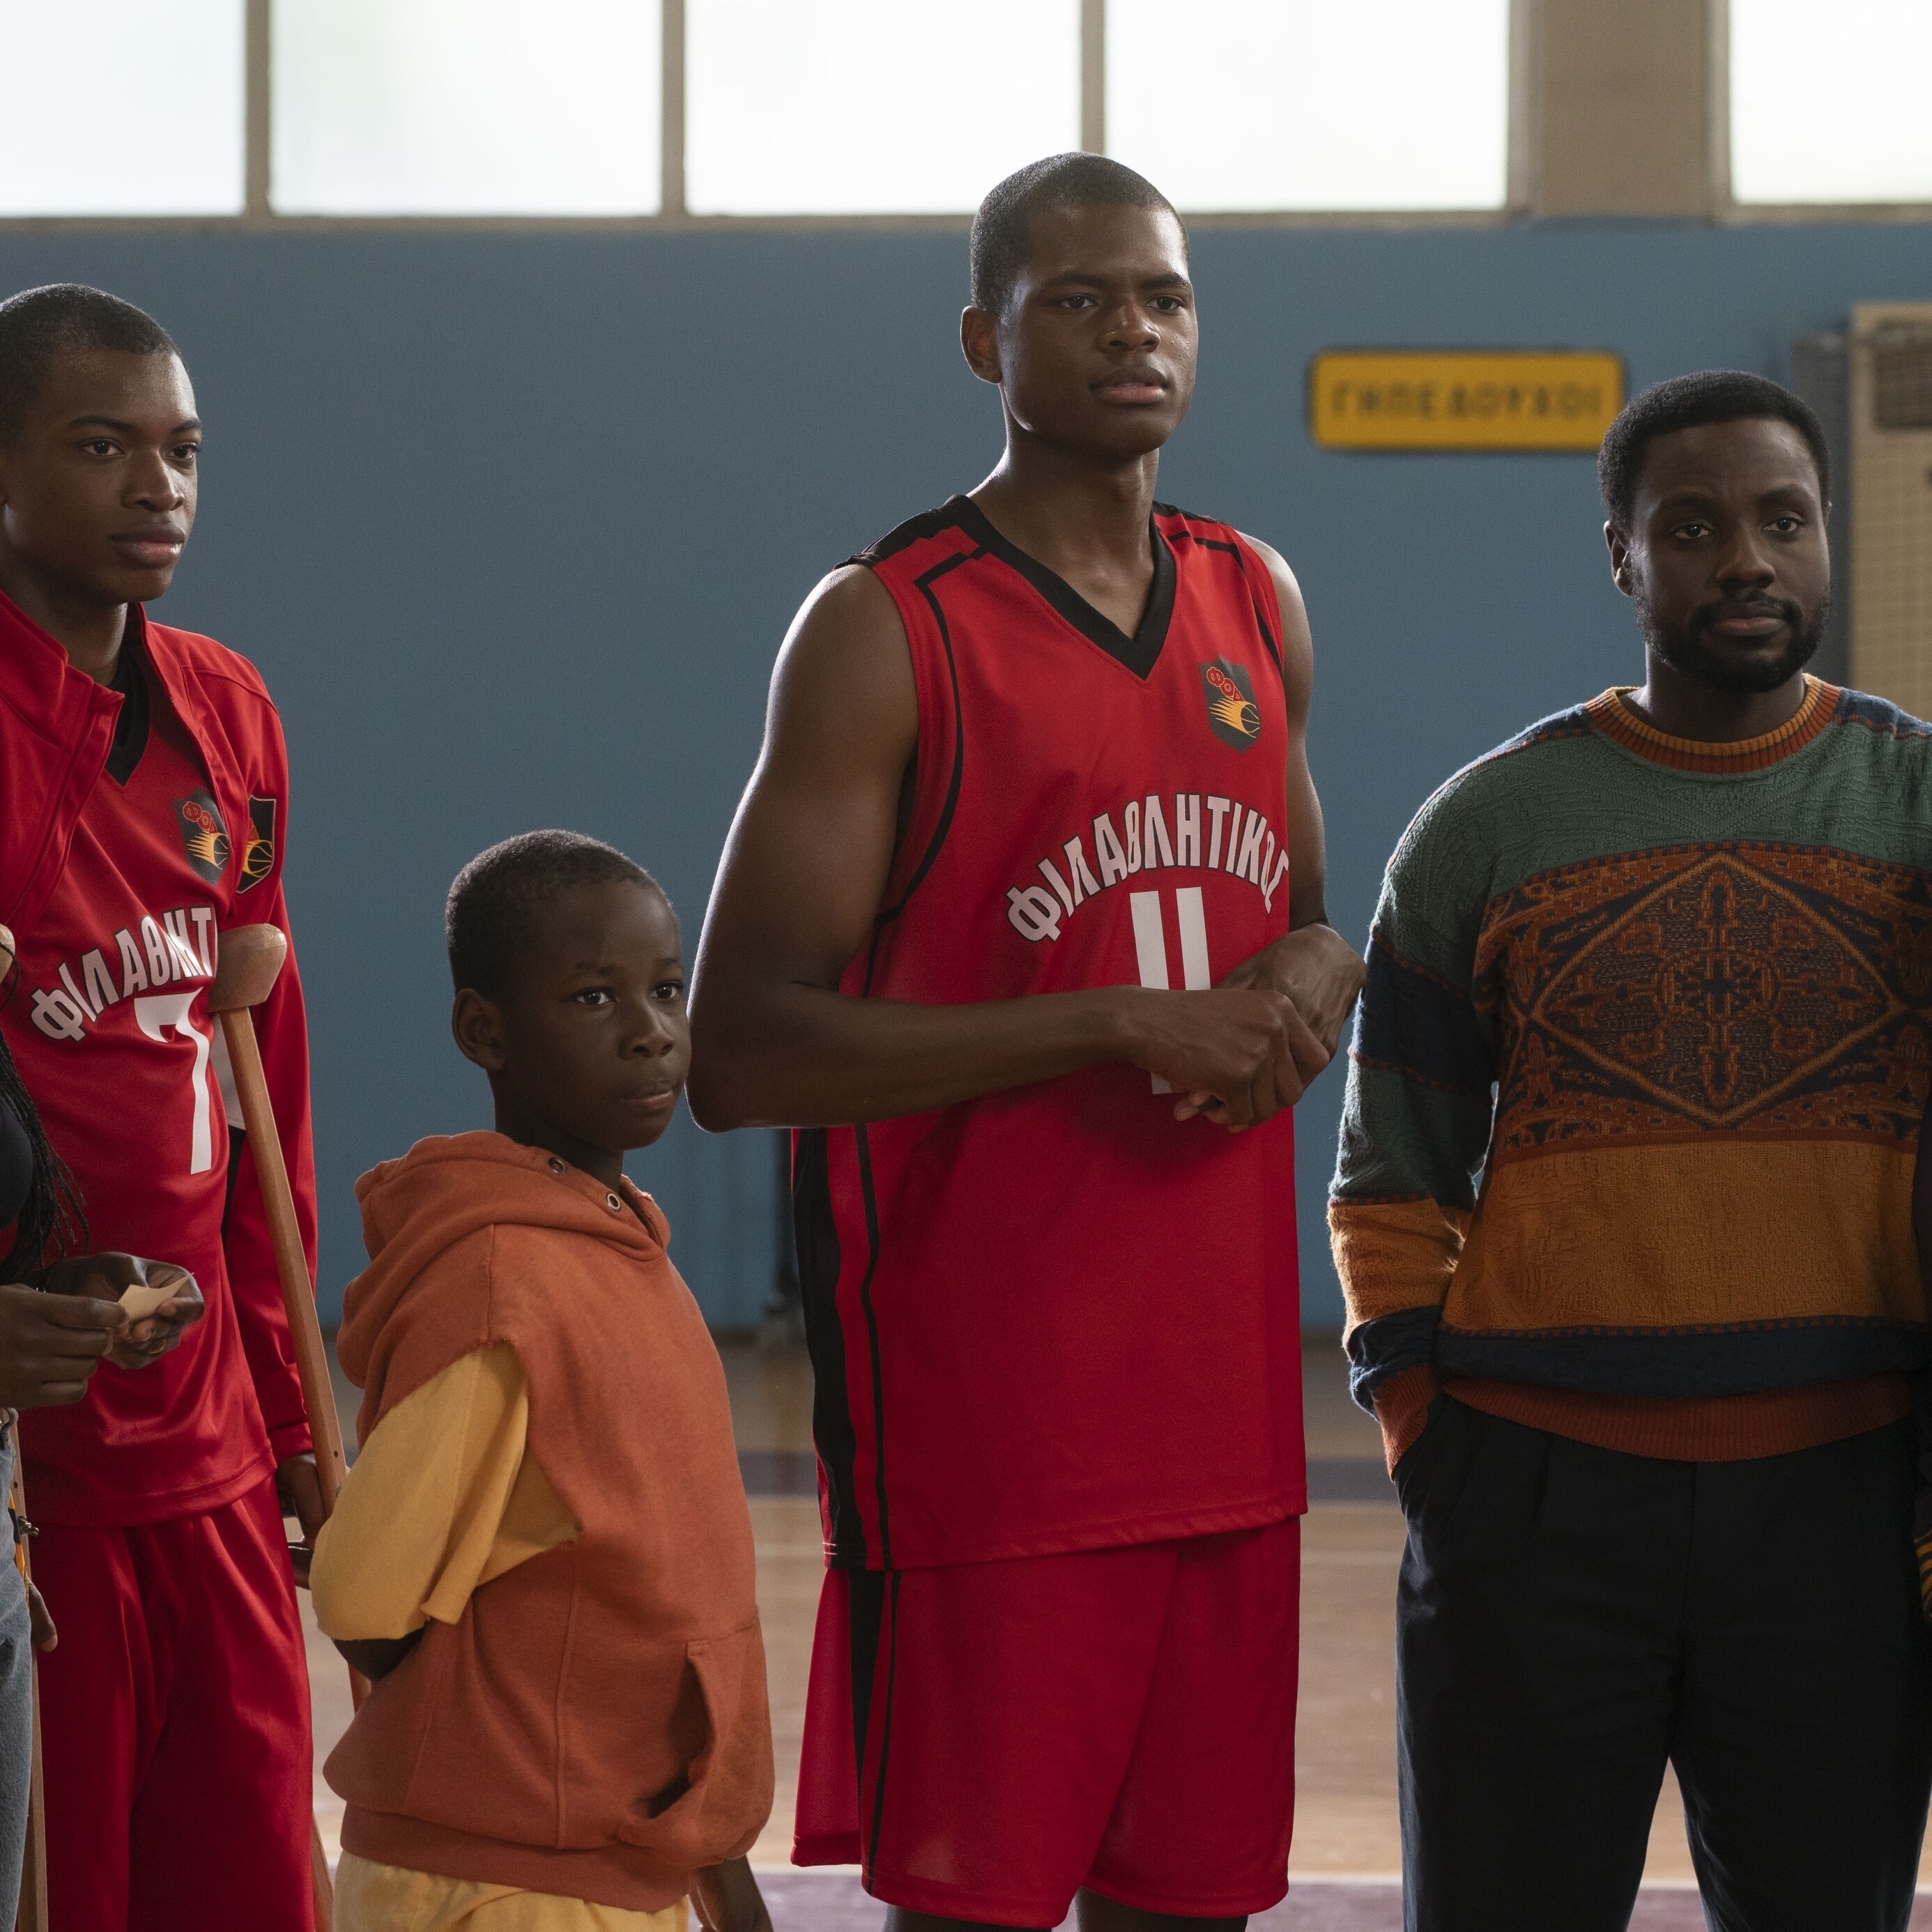 The best possible fictional basketball team